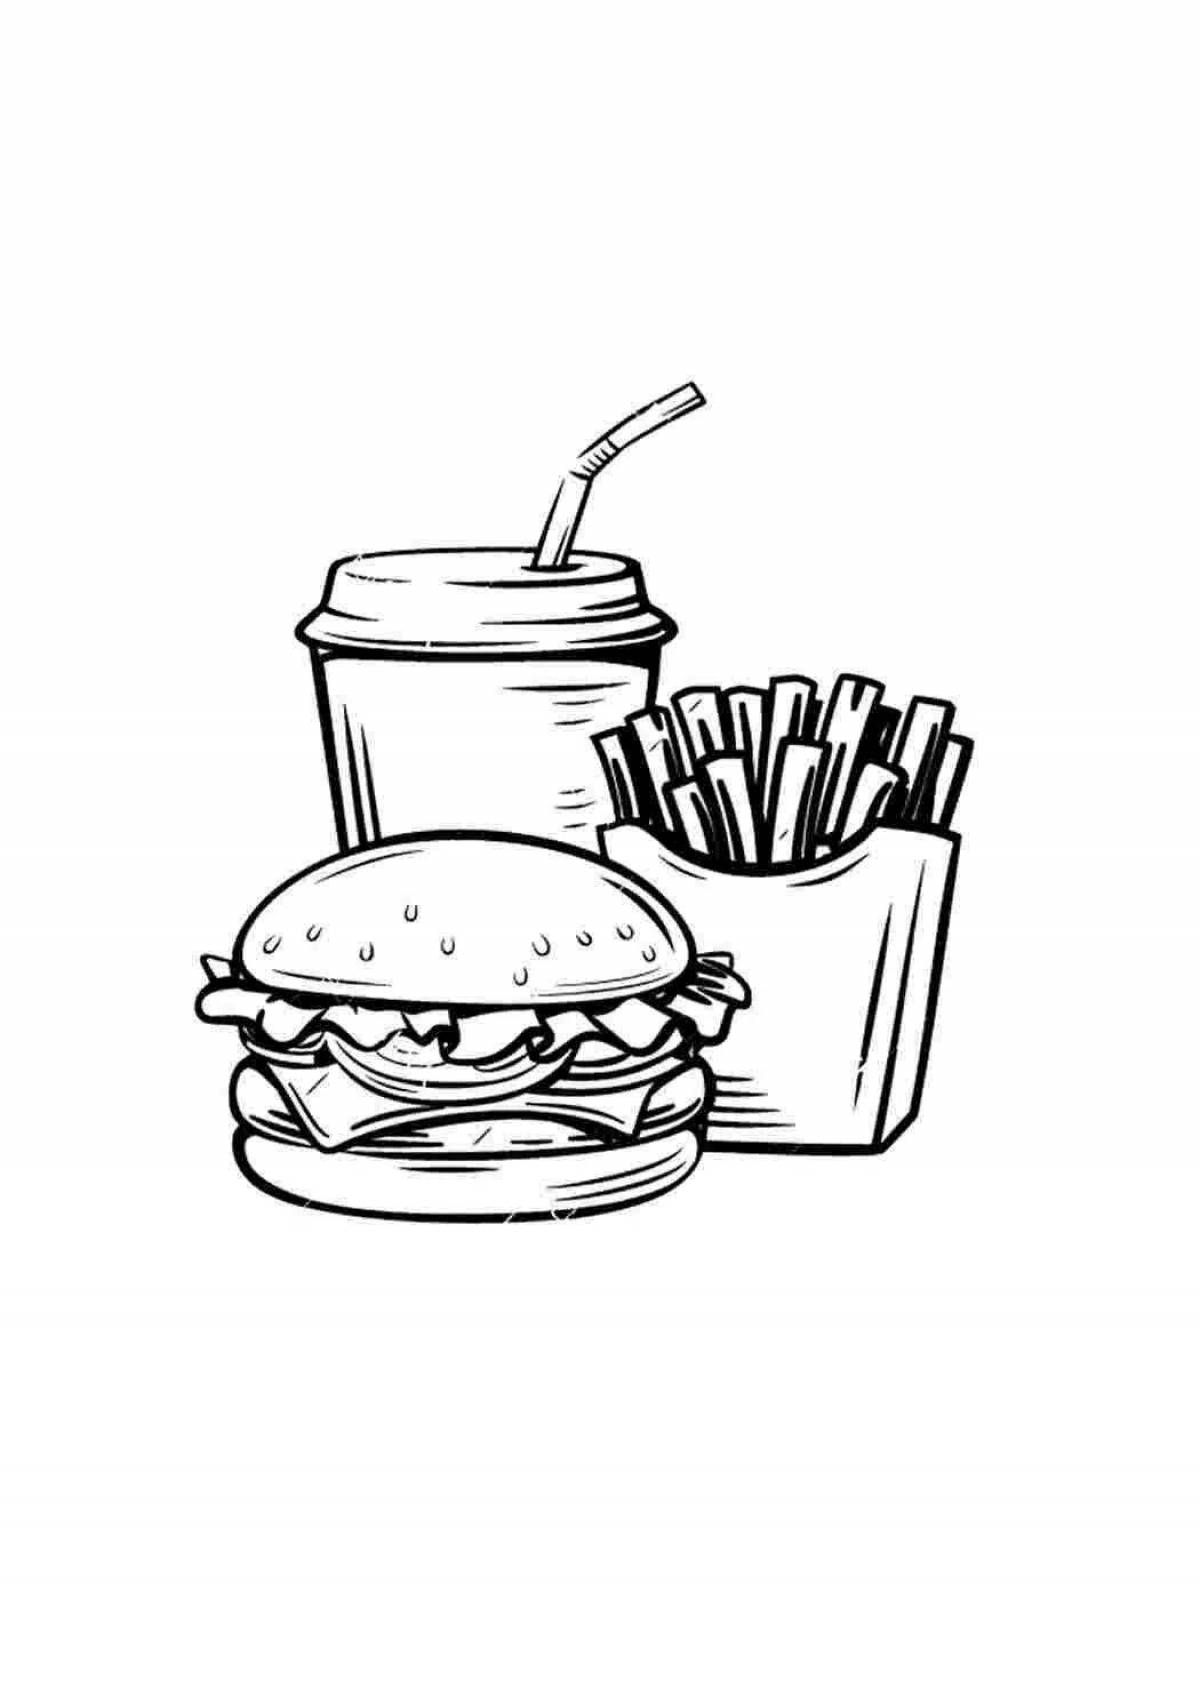 Adorable burger and fries coloring page